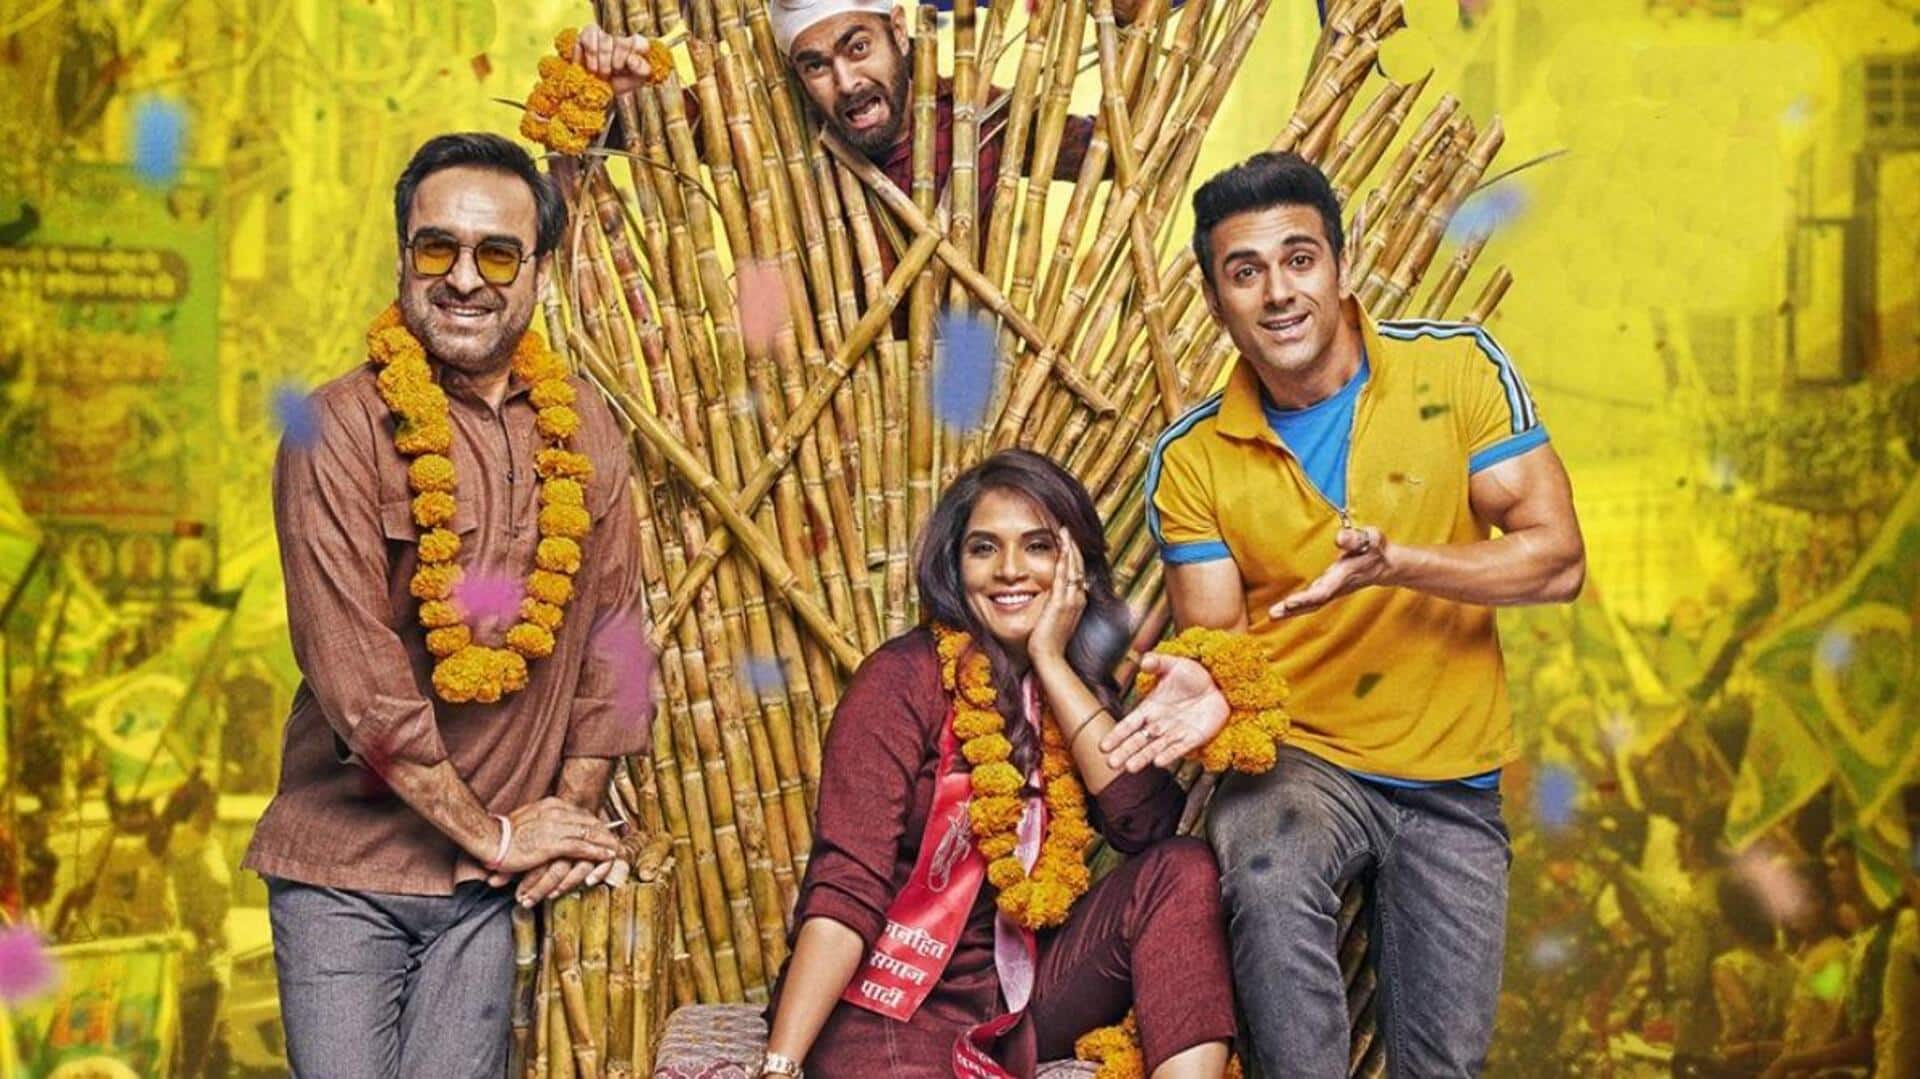 Box office collection: 'Fukrey 3' to surpass Rs. 100cr mark